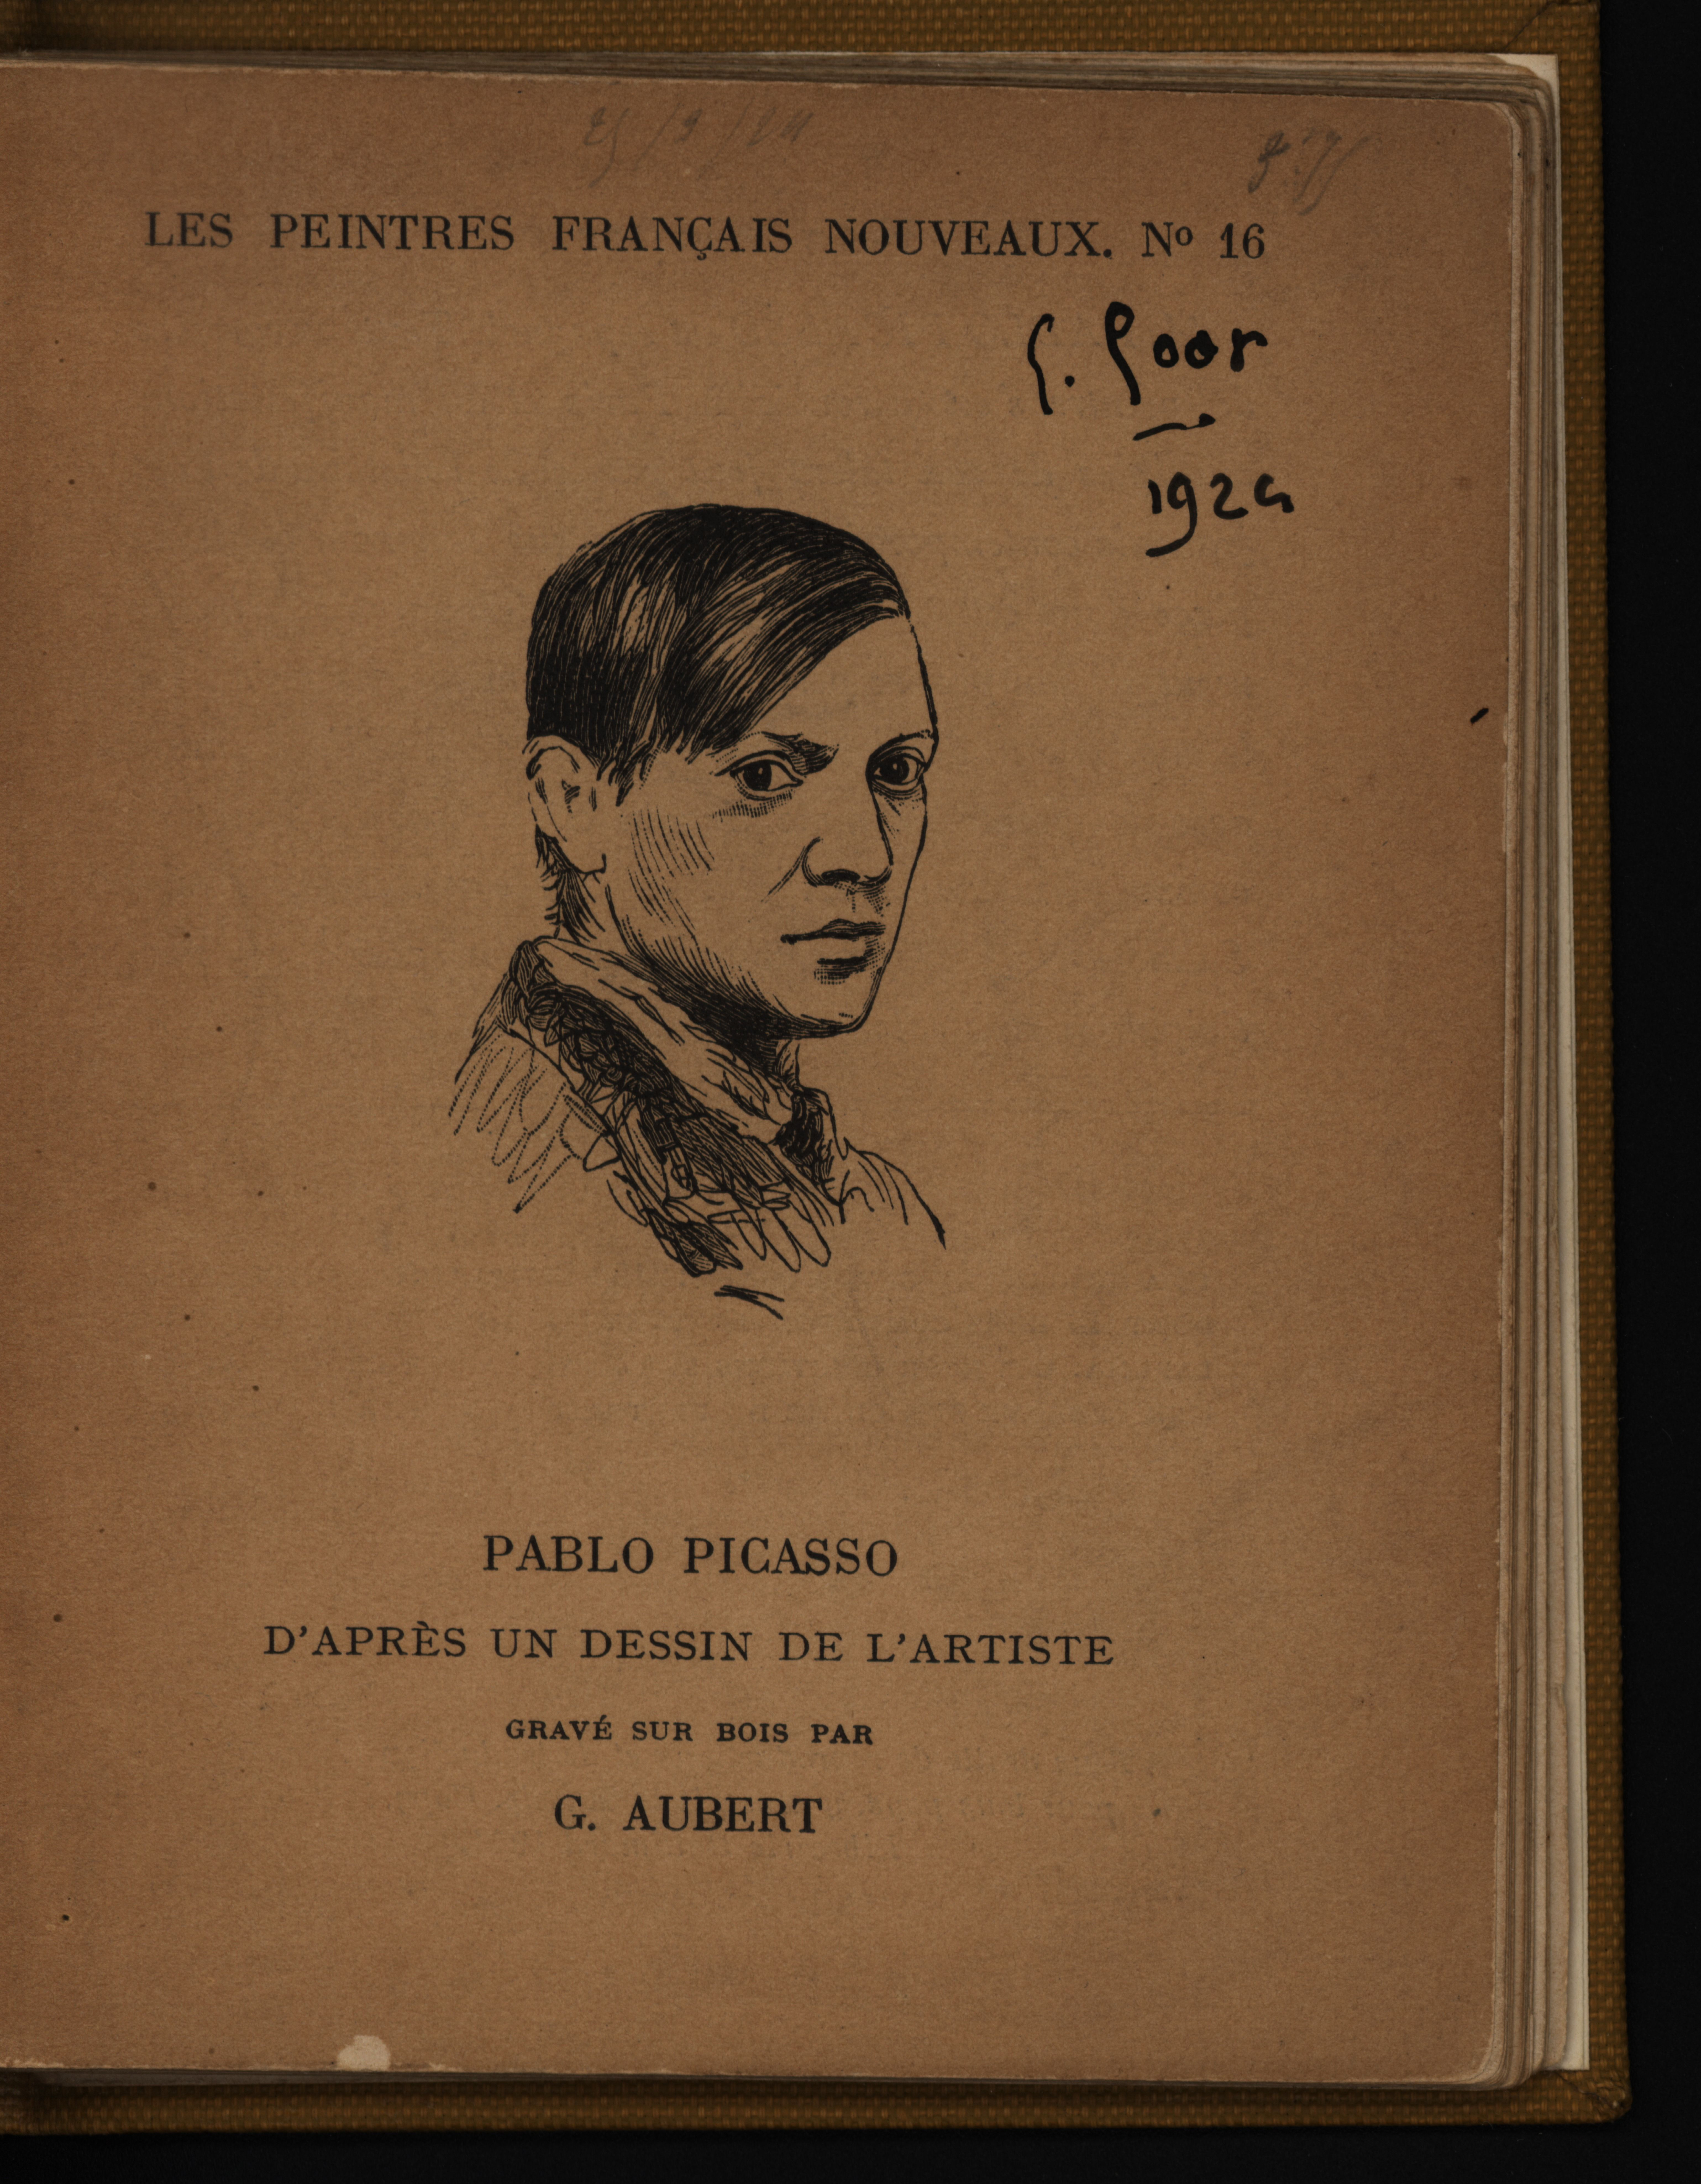 Title page.  Pablo Picasso, sketches.  Jean Charlot.